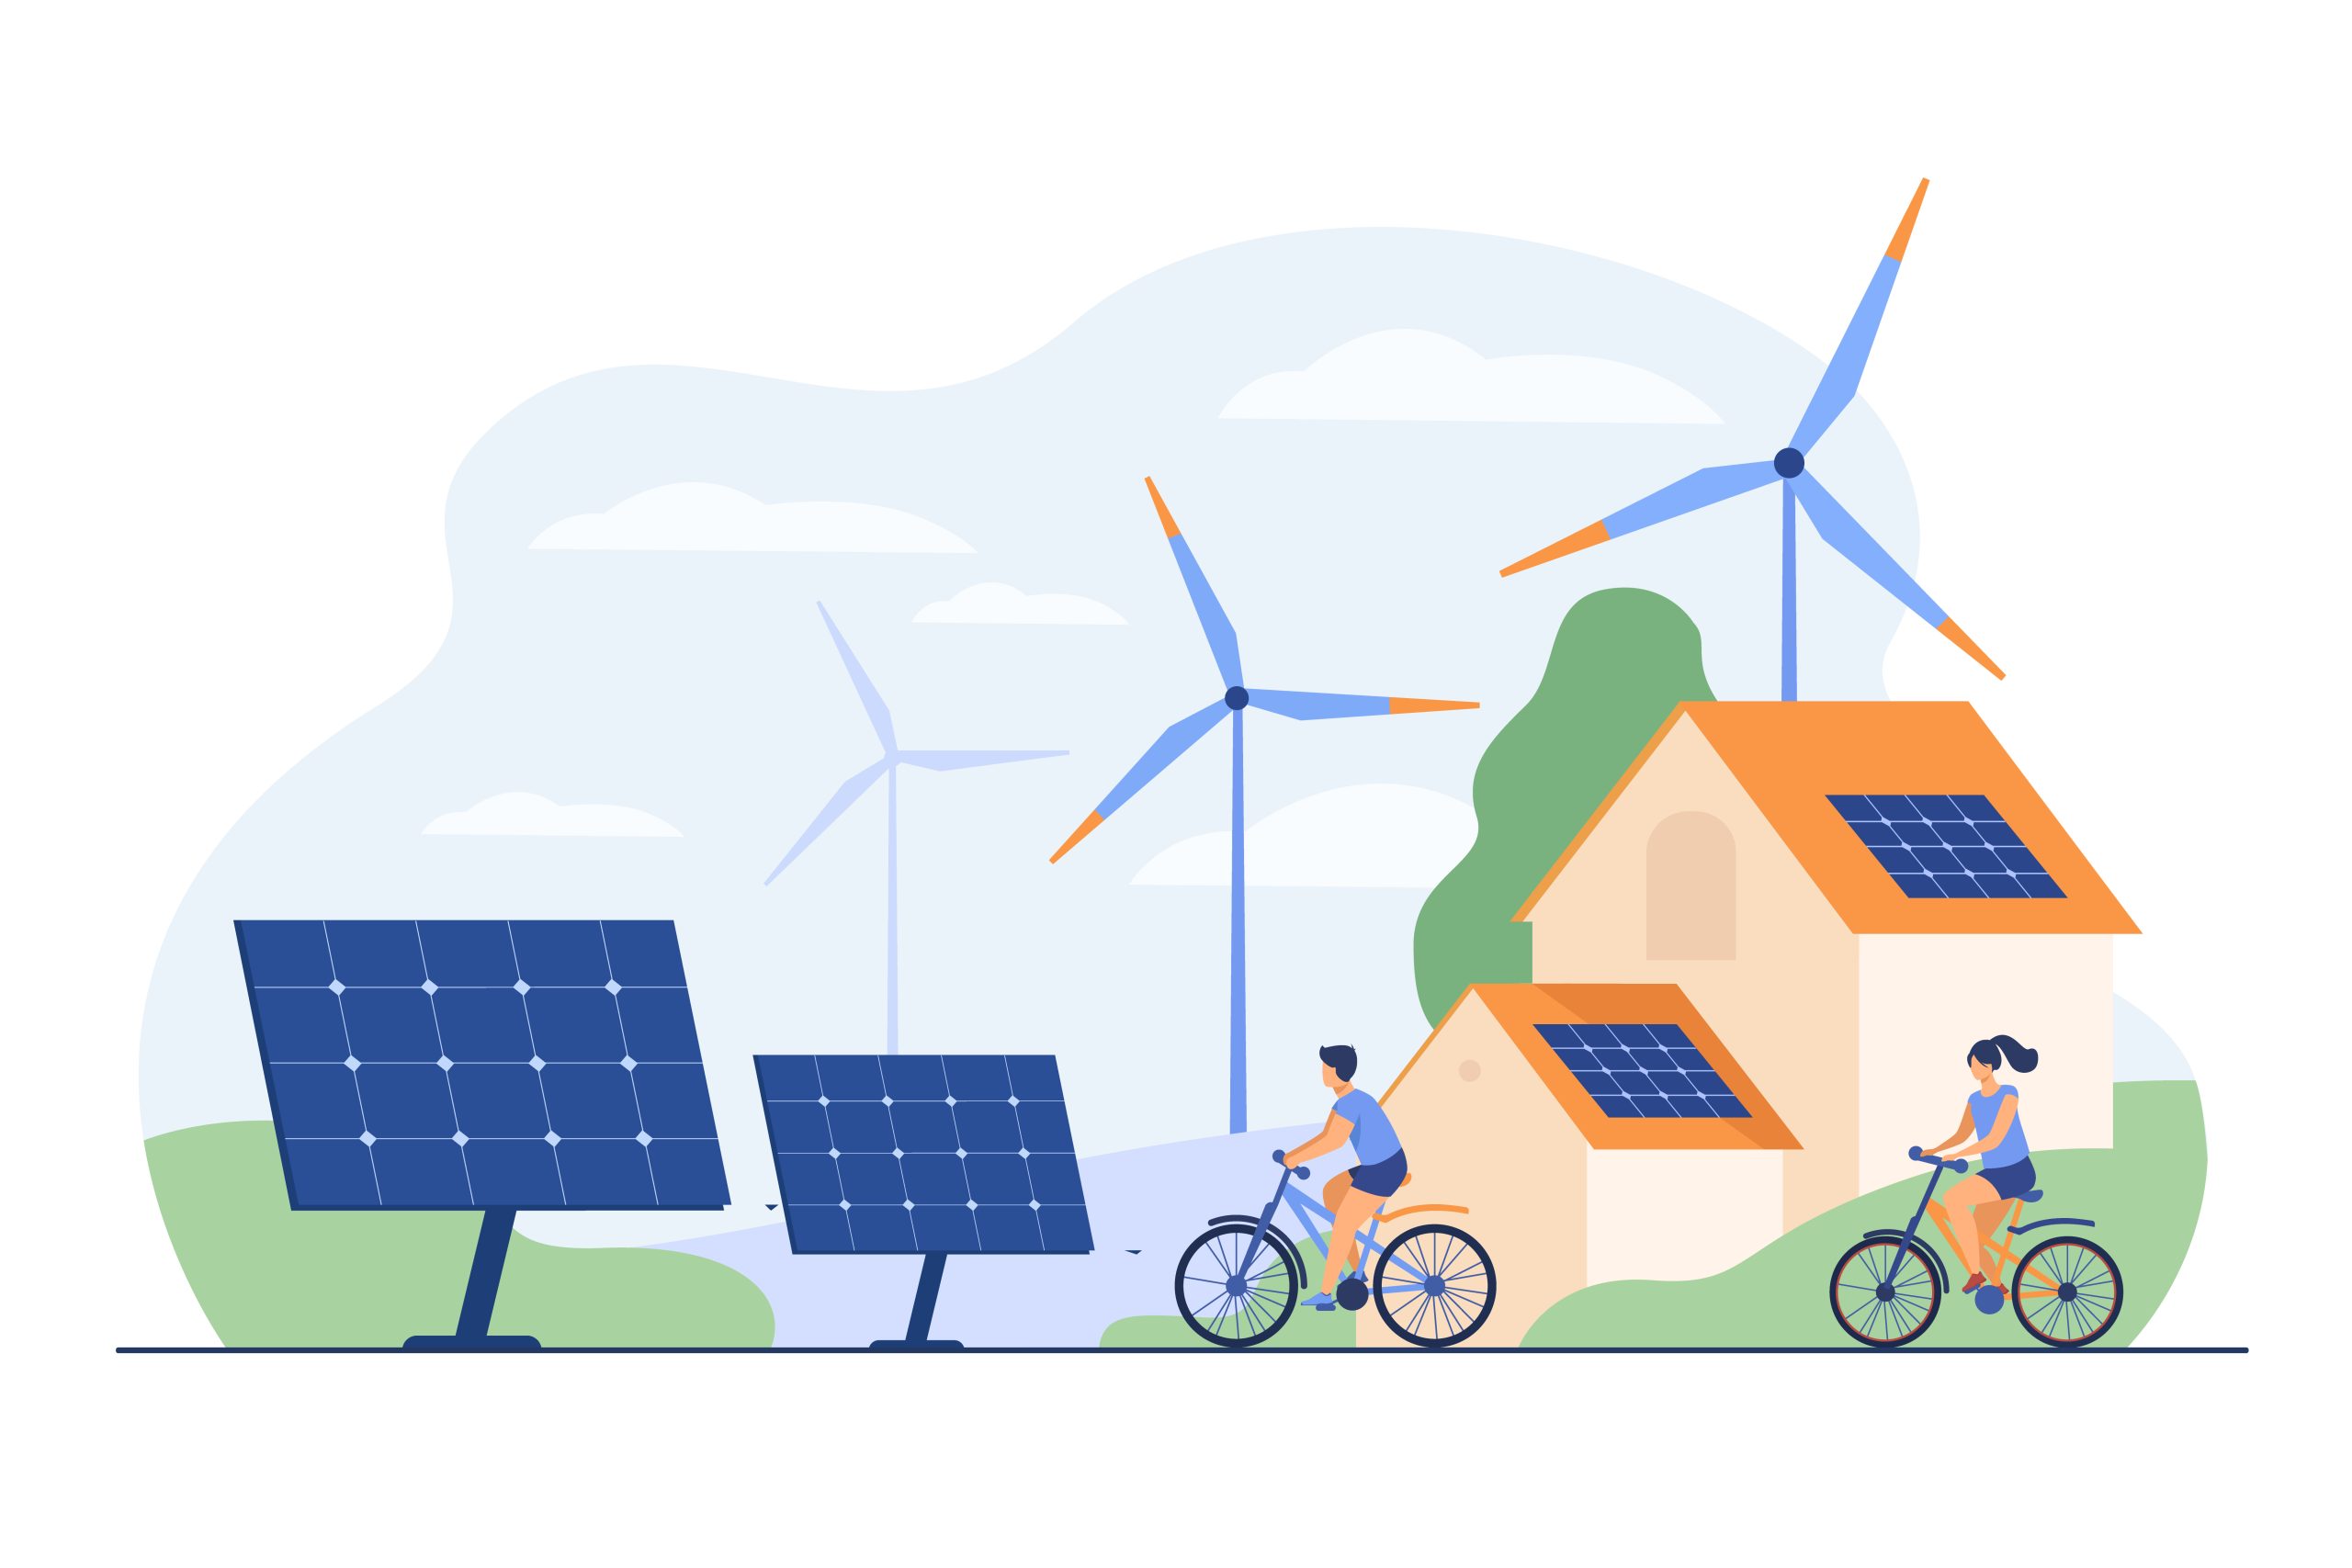 Active people on bikes, windmills and house with solar panel on rooftop flat vector illustration. Cartoon characters living healthy lifestyle. Renewable energy and smart technology concept